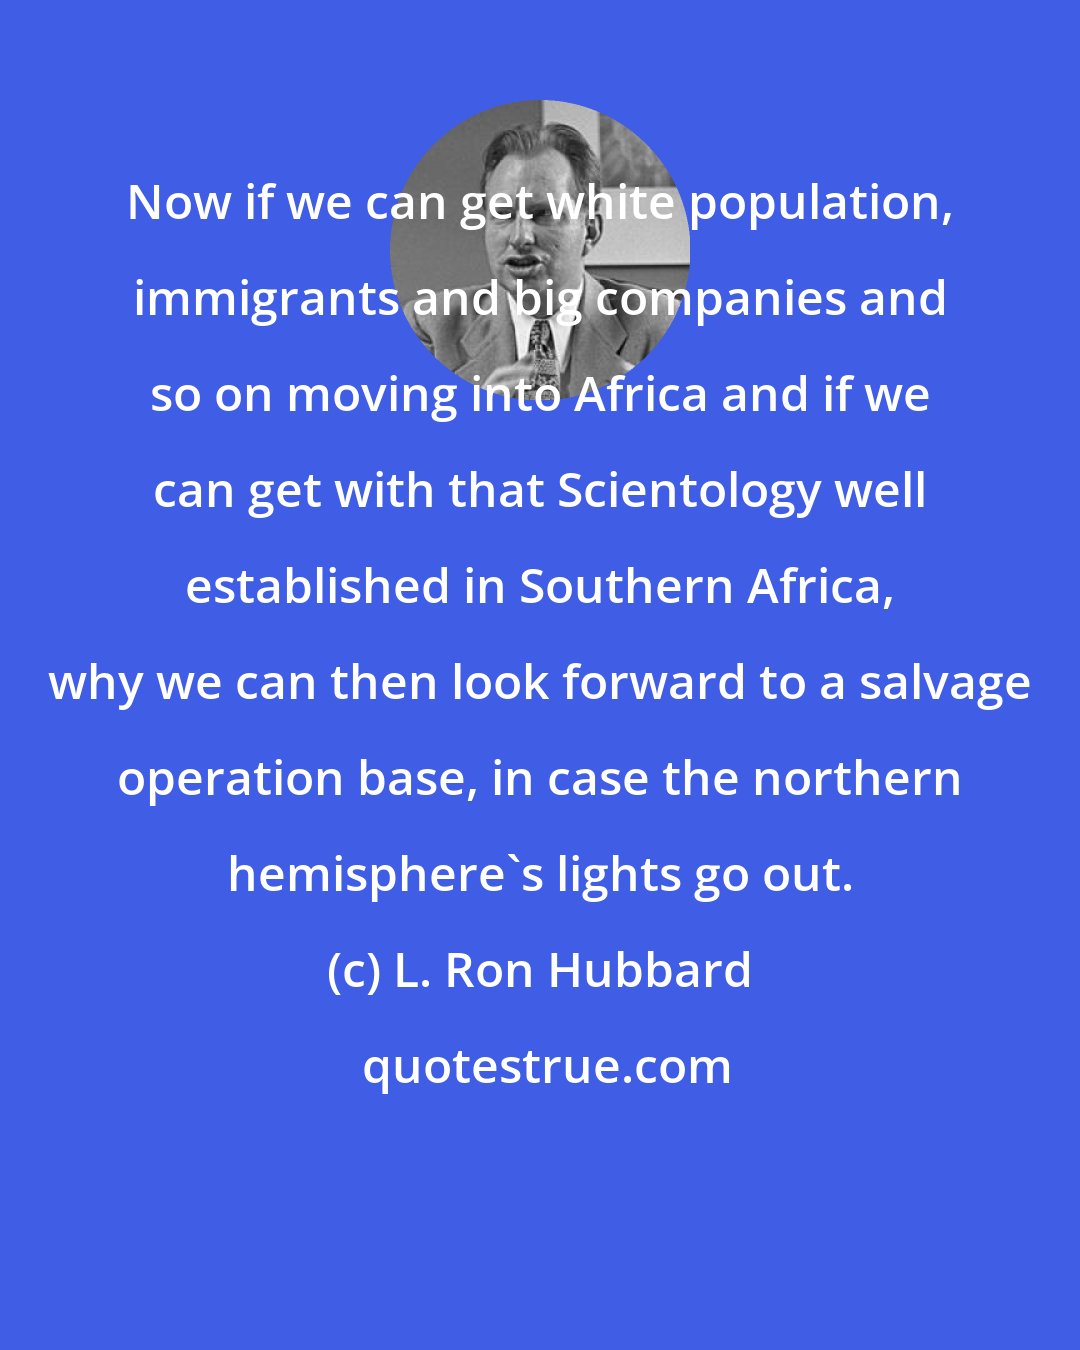 L. Ron Hubbard: Now if we can get white population, immigrants and big companies and so on moving into Africa and if we can get with that Scientology well established in Southern Africa, why we can then look forward to a salvage operation base, in case the northern hemisphere's lights go out.